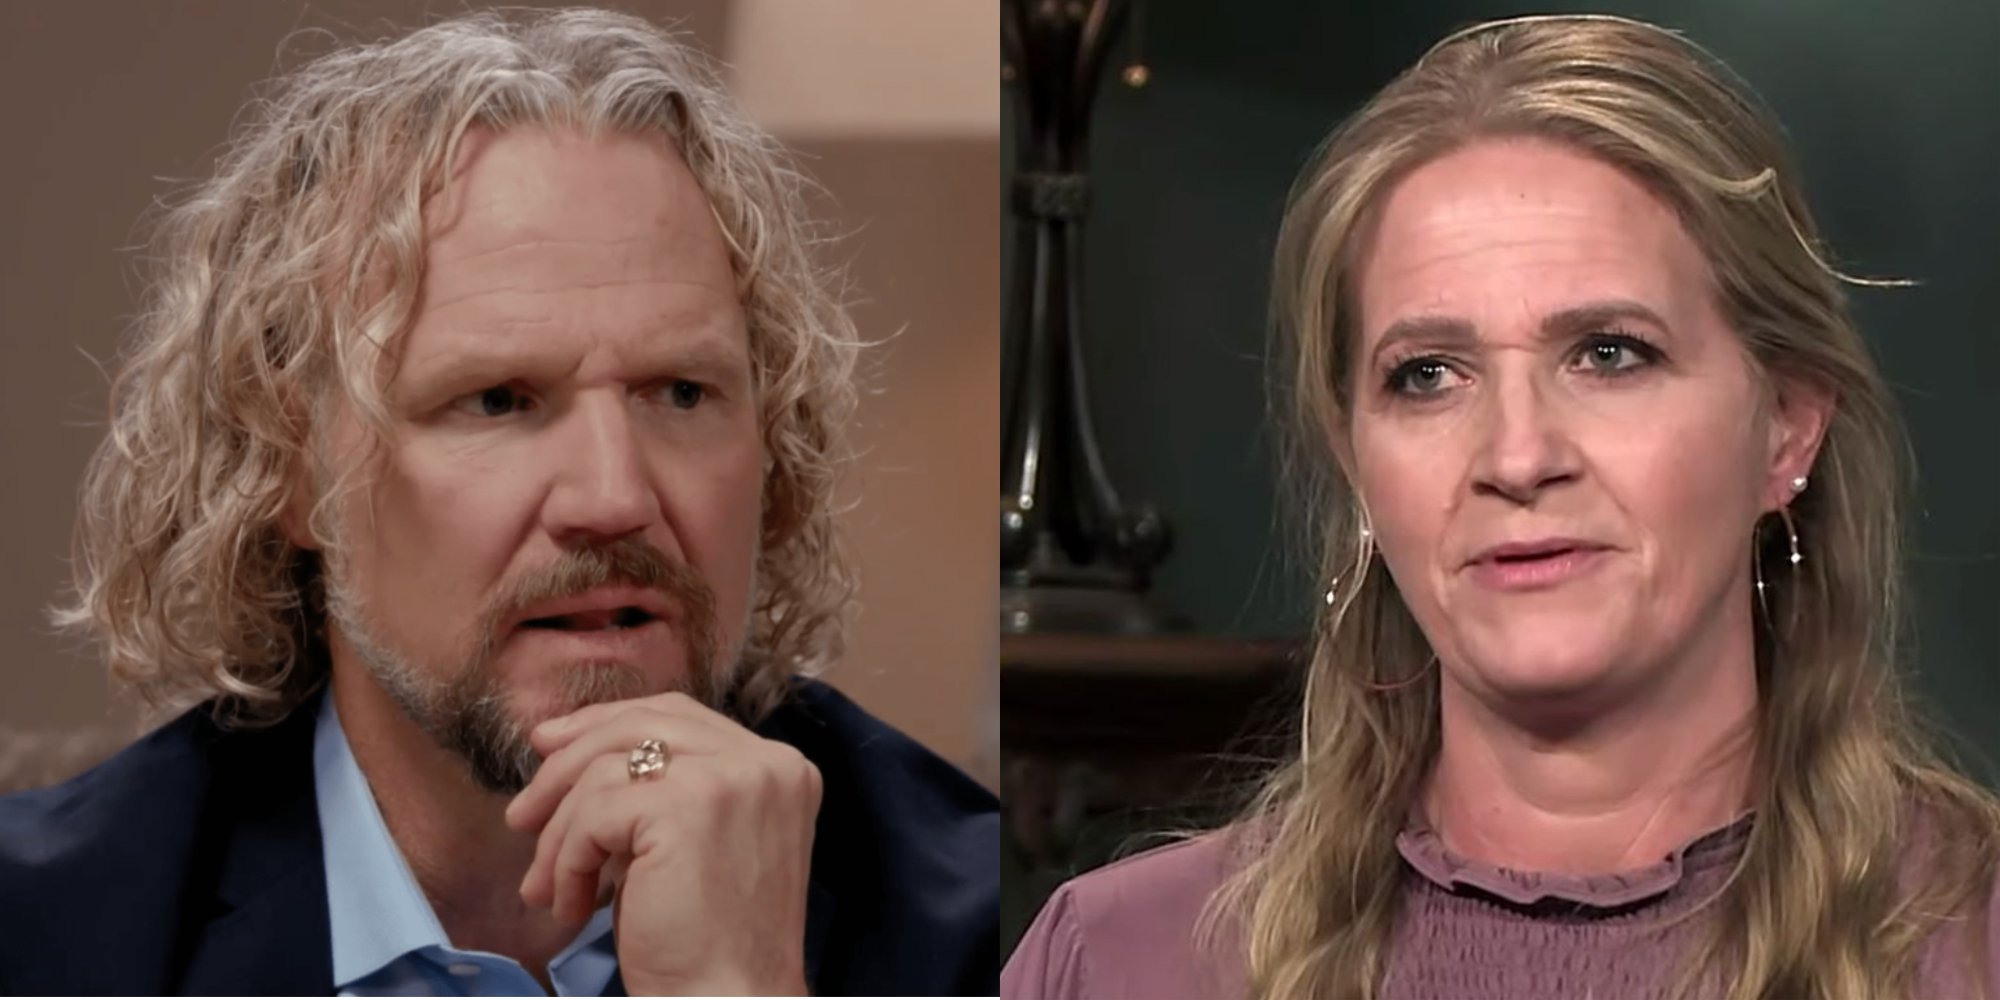 ‘Sister Wives’ Fans Horrified as Kody Brown Lashes out at Christine Brown During Heartbreaking Season 17 Trailer: ‘Gaslighter’